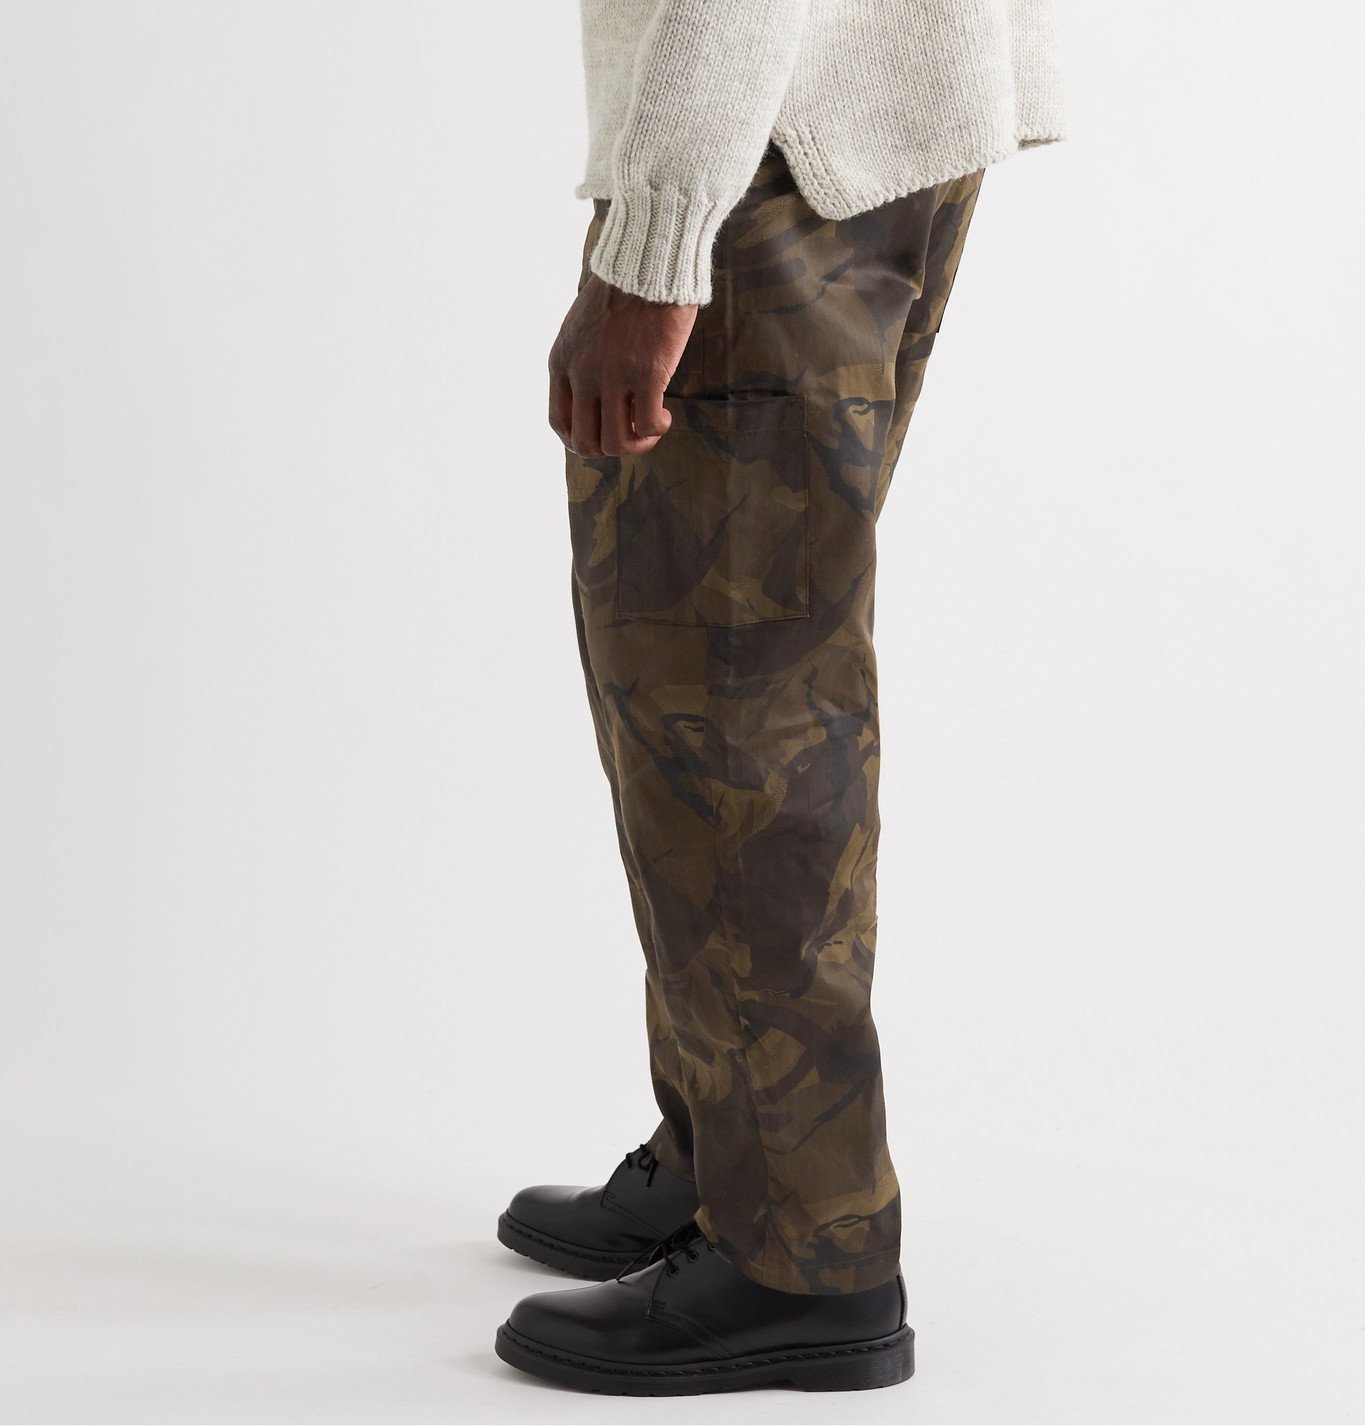 OLIVER SPENCER - Judo Tapered Camouflage-Print Herringbone Cotton-Twill Cargo Trousers - Brown